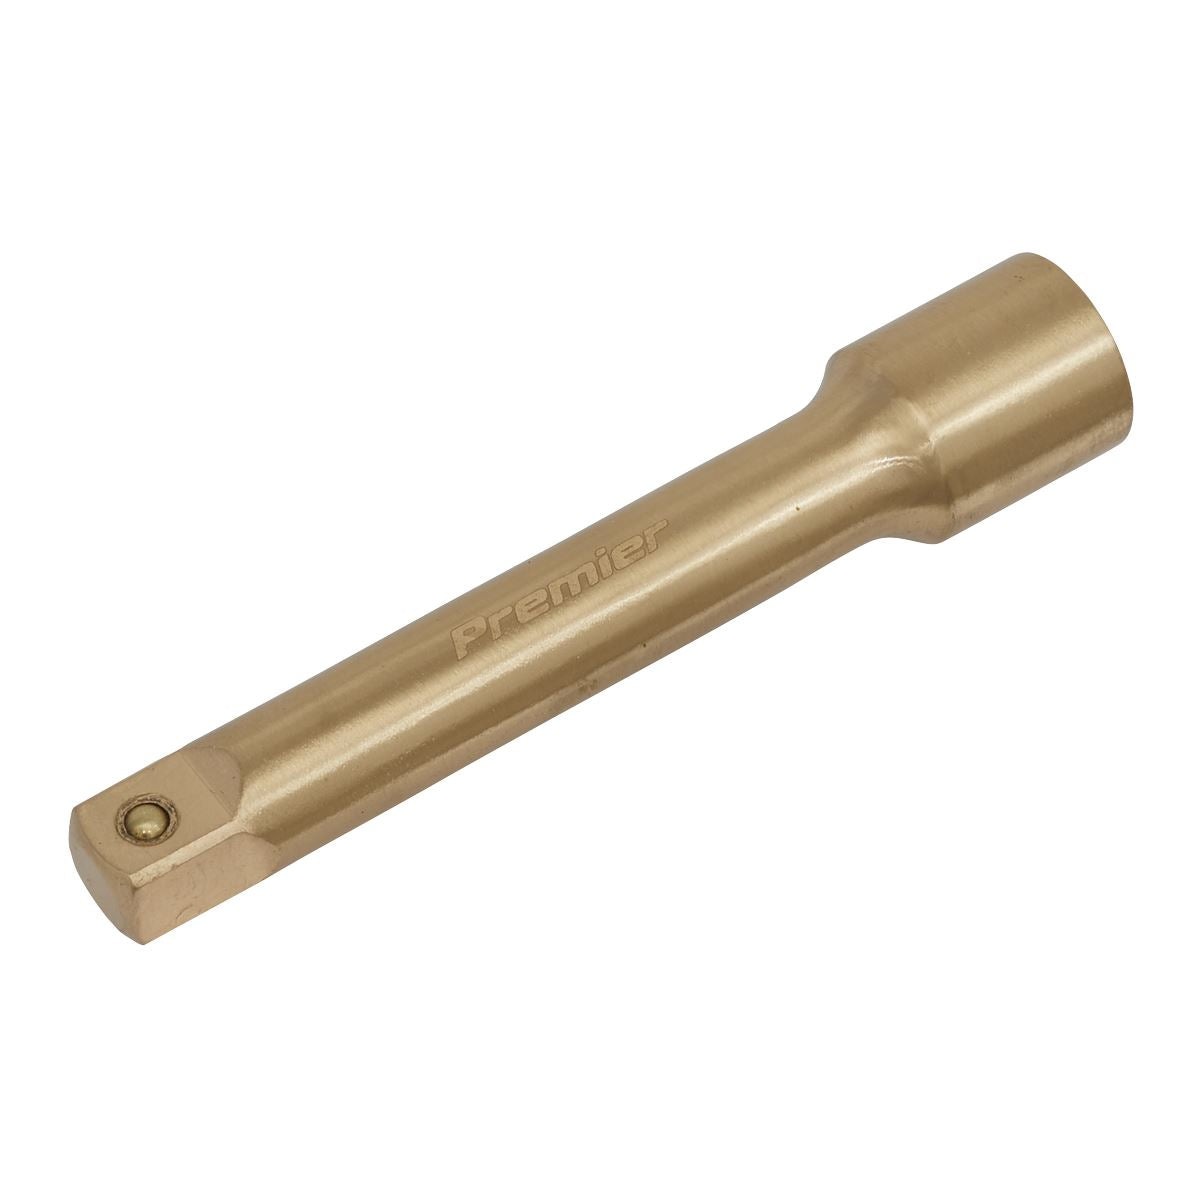 Sealey Premier Extension Bar 1/2"Sq Drive 125mm - Non-Sparking